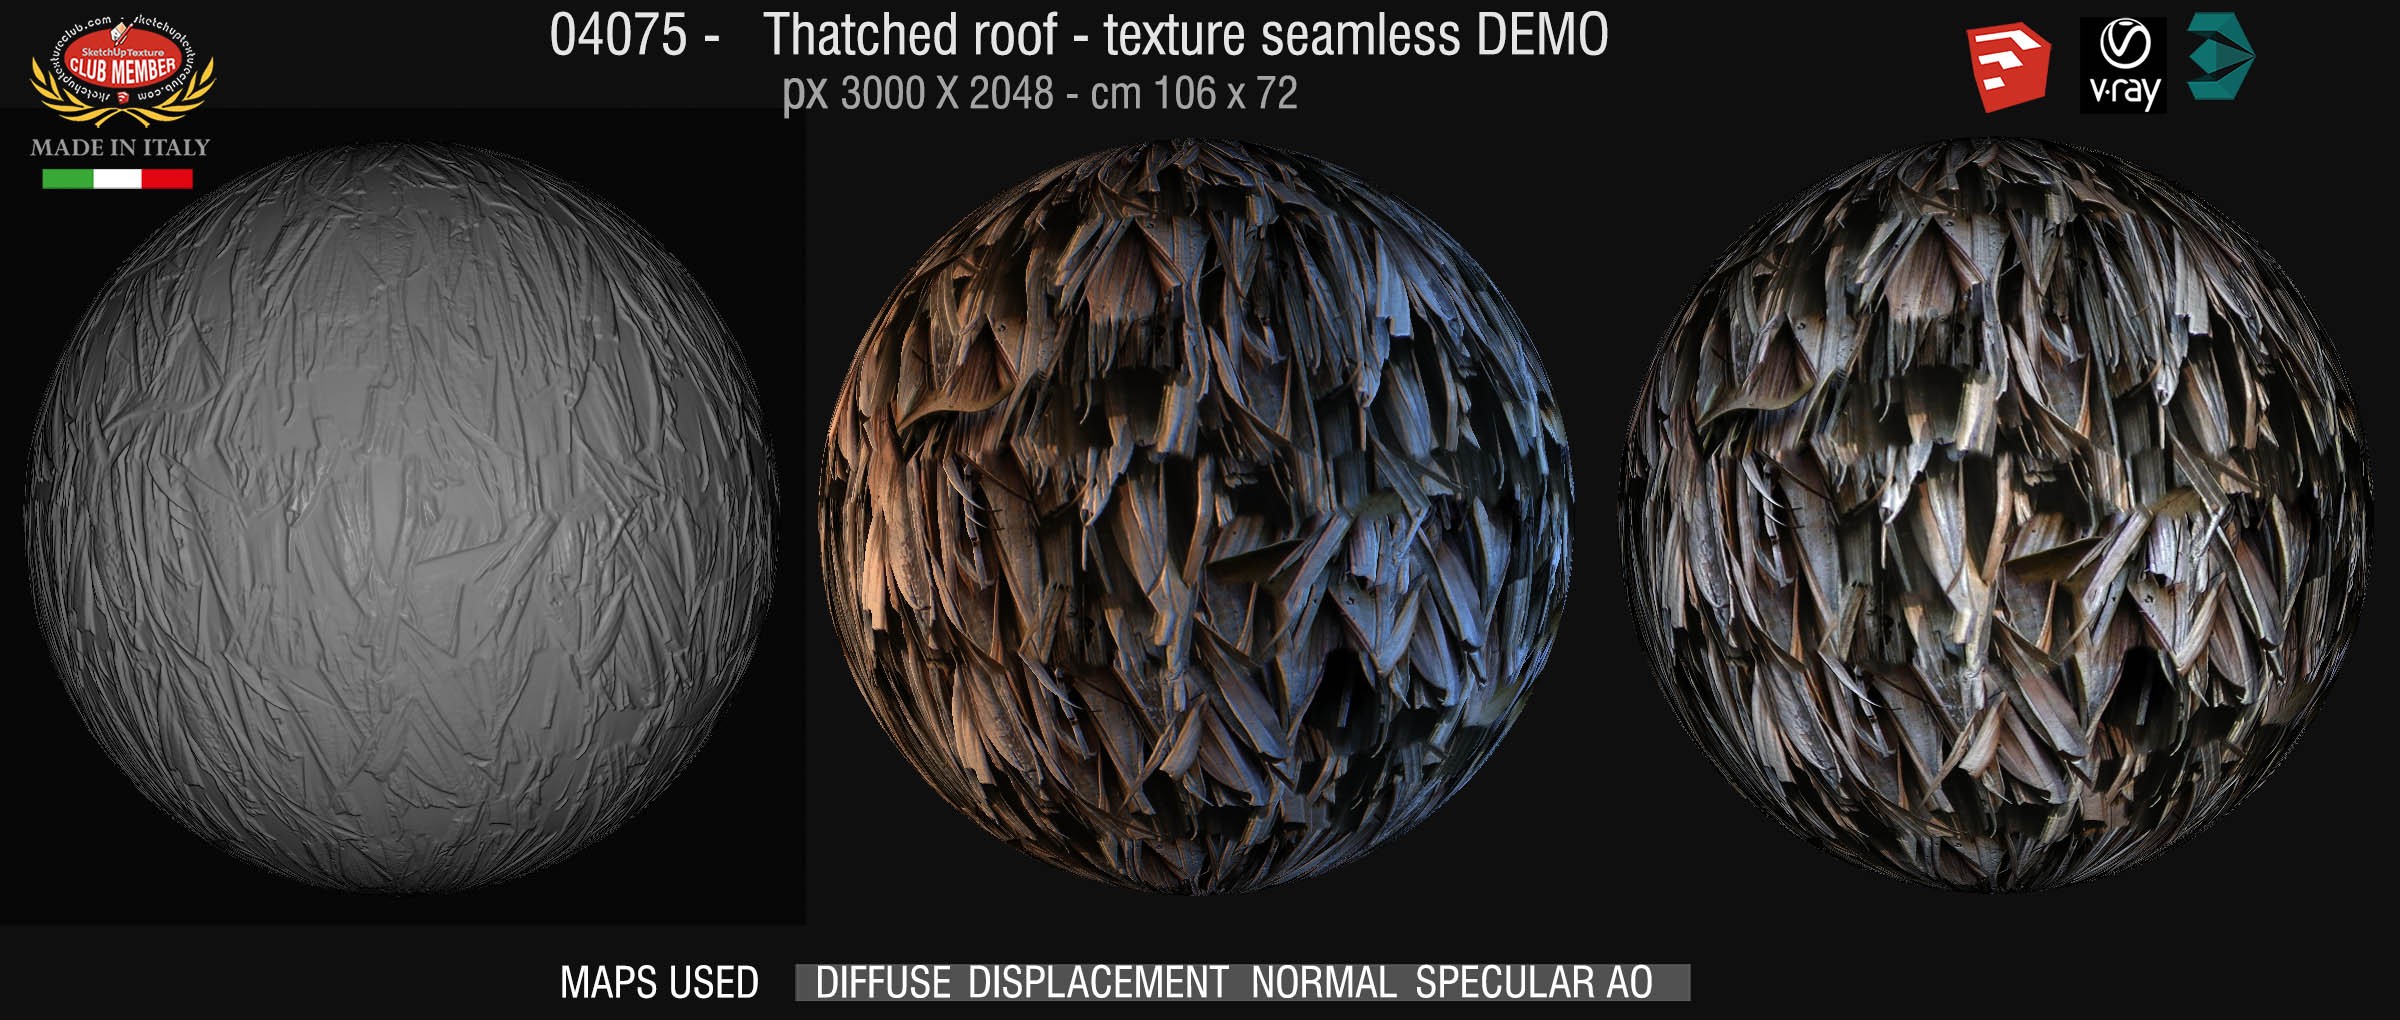 04075 Thatched roof texture seamless + maps DEMO